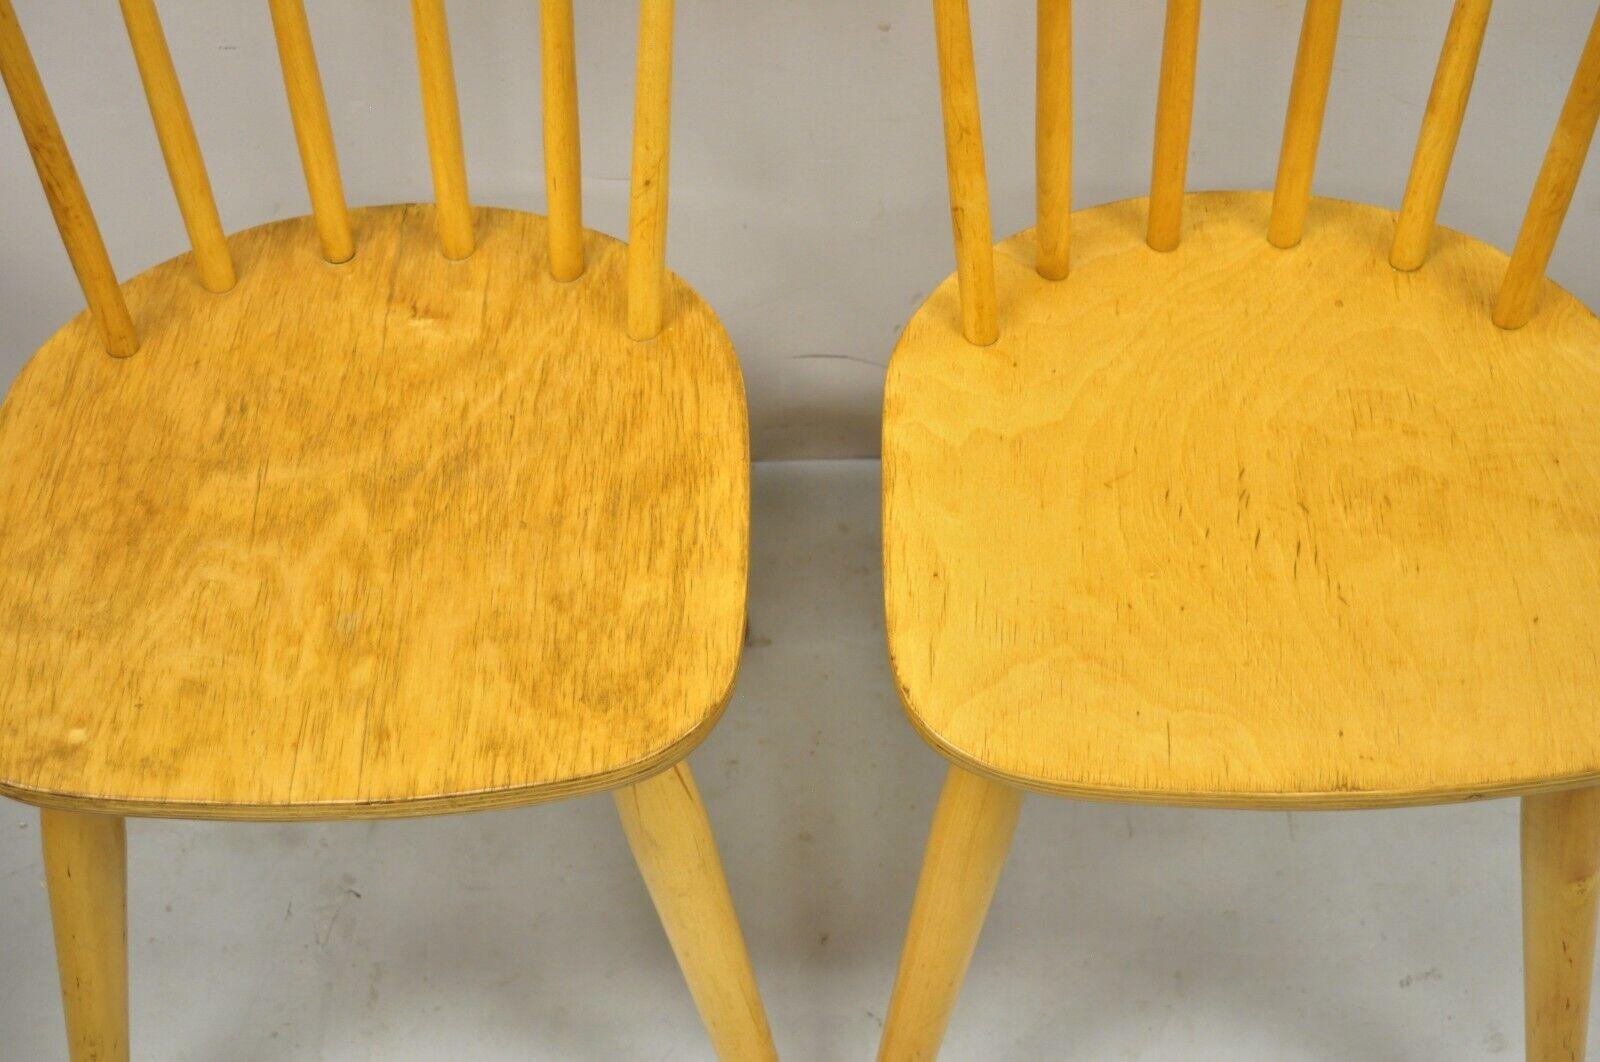 Vintage Mid-Century Modern Spindle Bush Birch Maple Side Chairs, a Pair For Sale 4